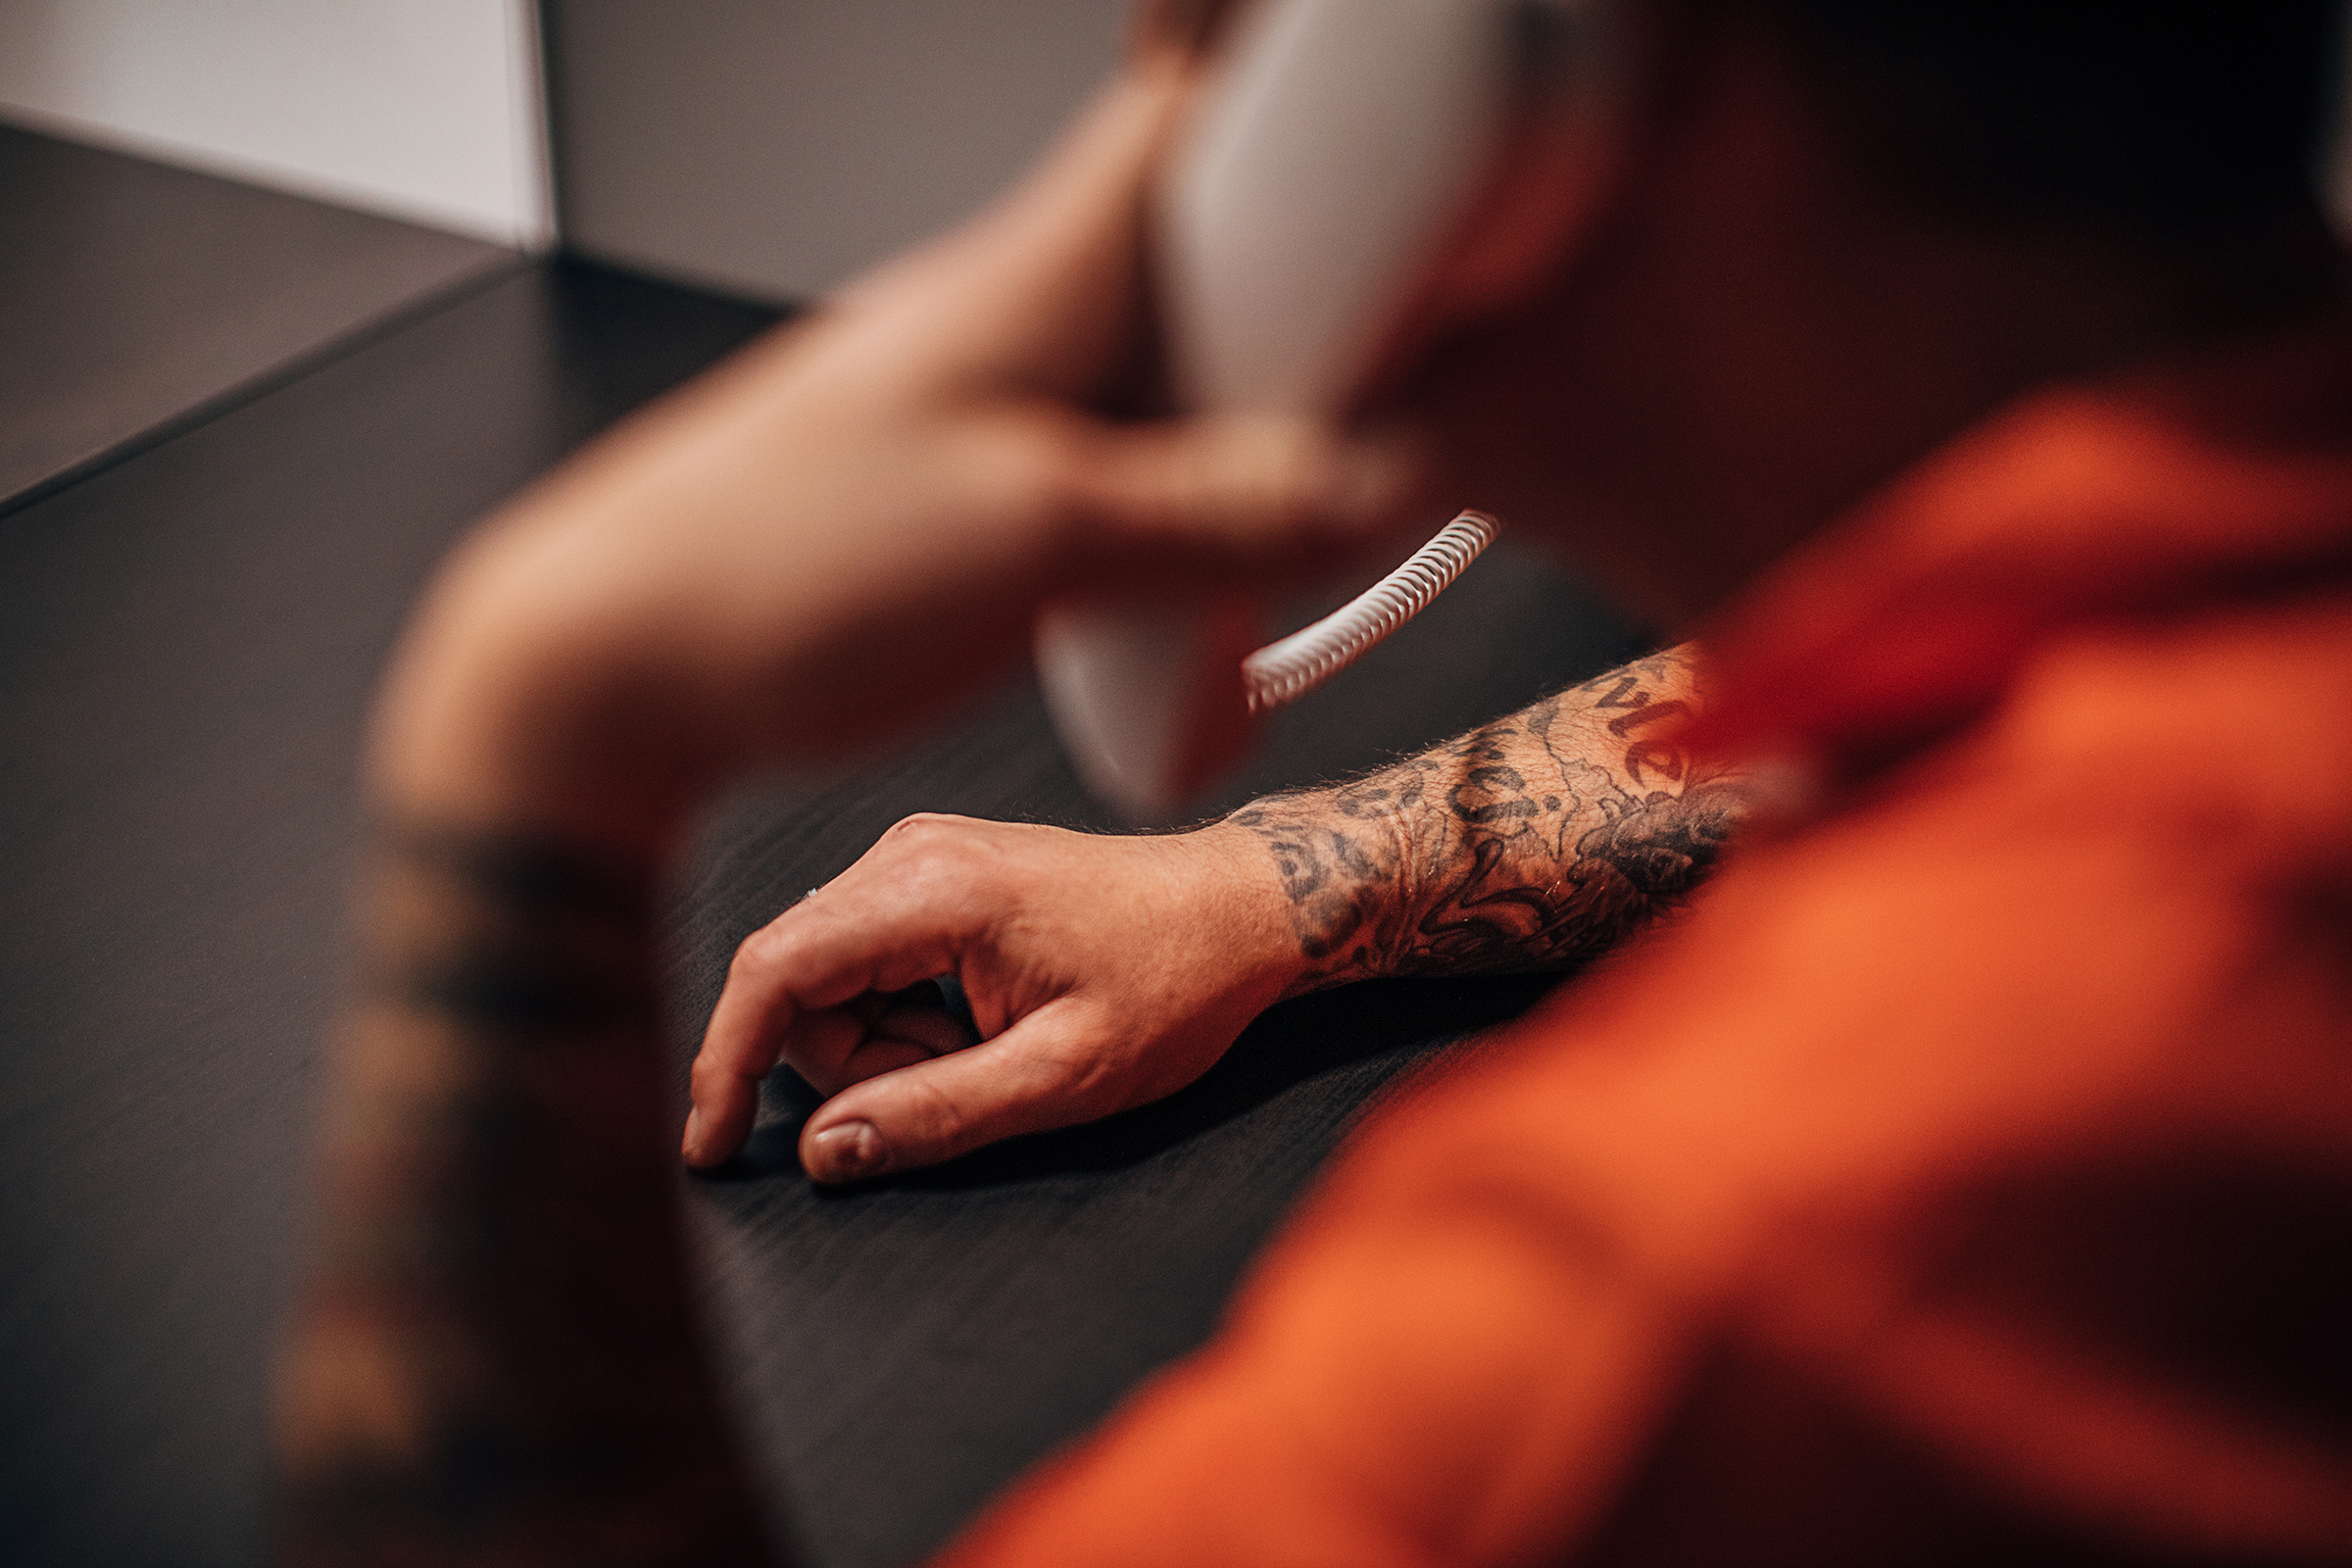 Pigeonly builds technology products that connects inmates and their support network of family and friends. (Getty Images)